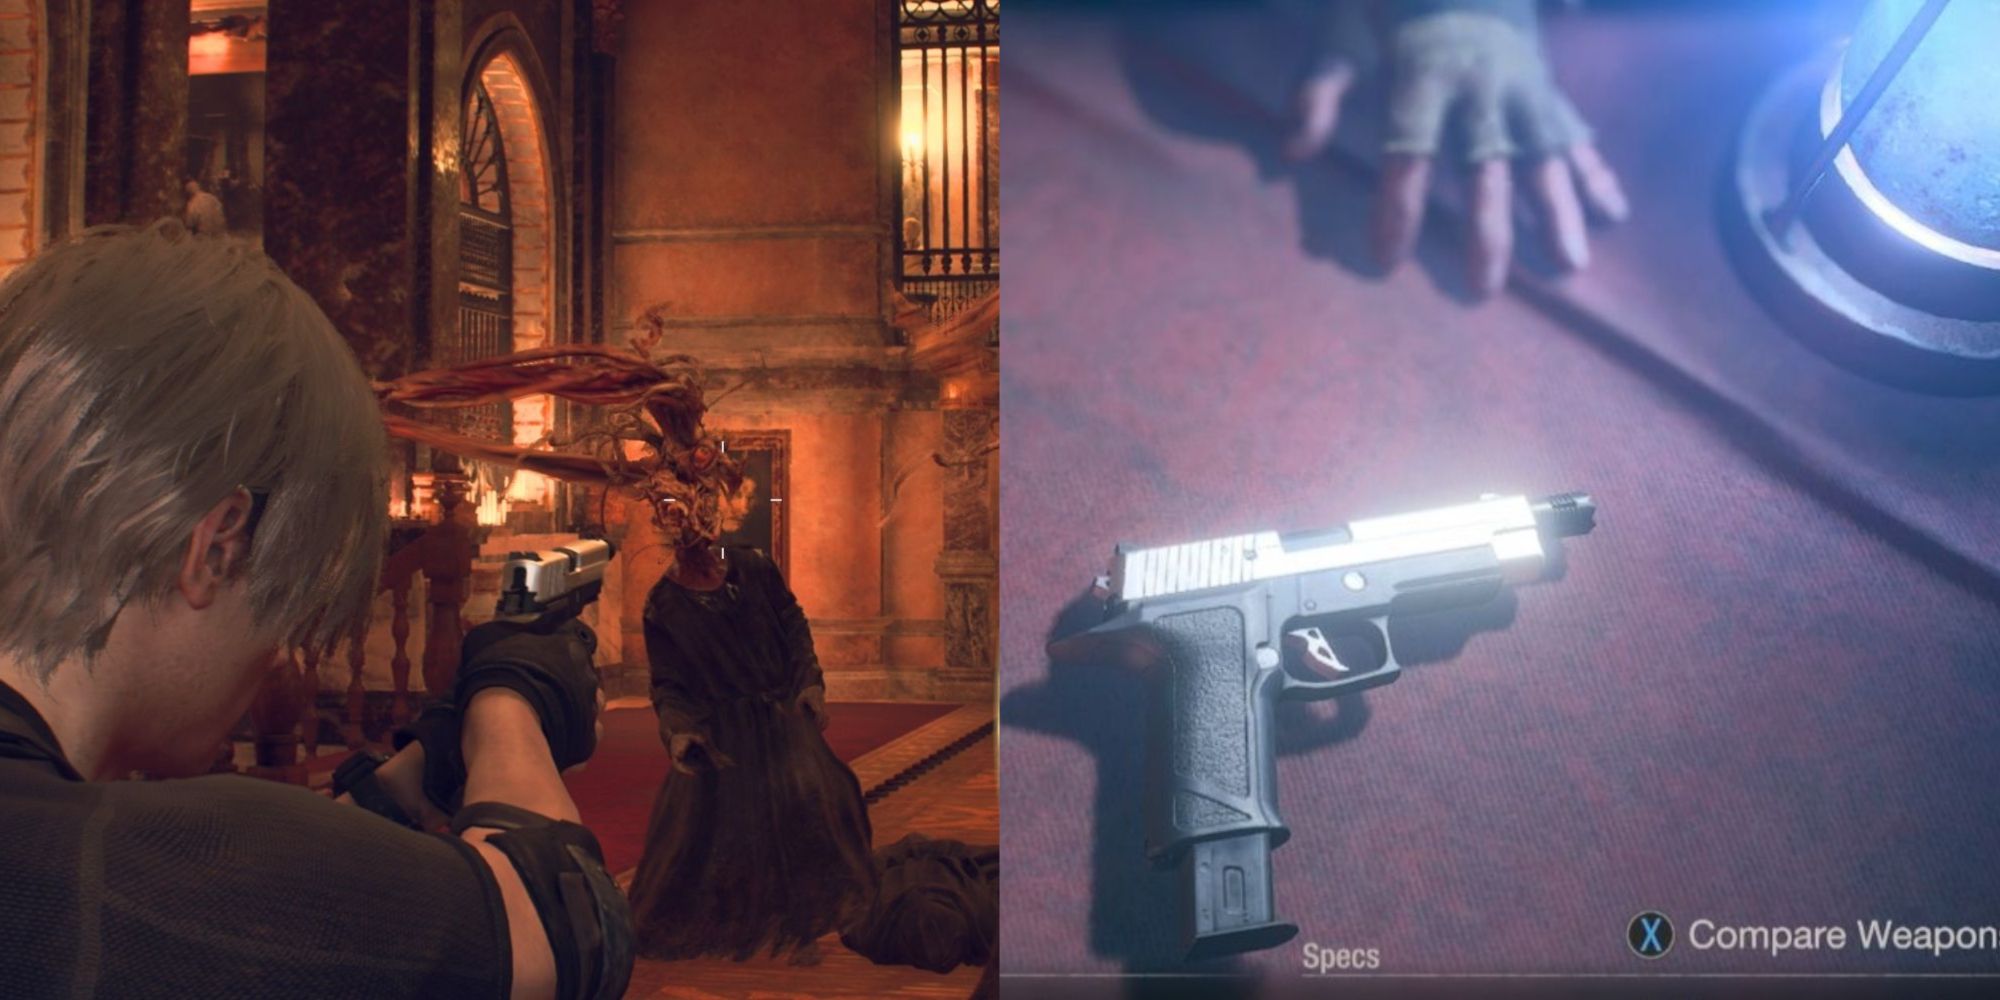 Should you use the Punisher or the SG-09 R pistol in Resident Evil